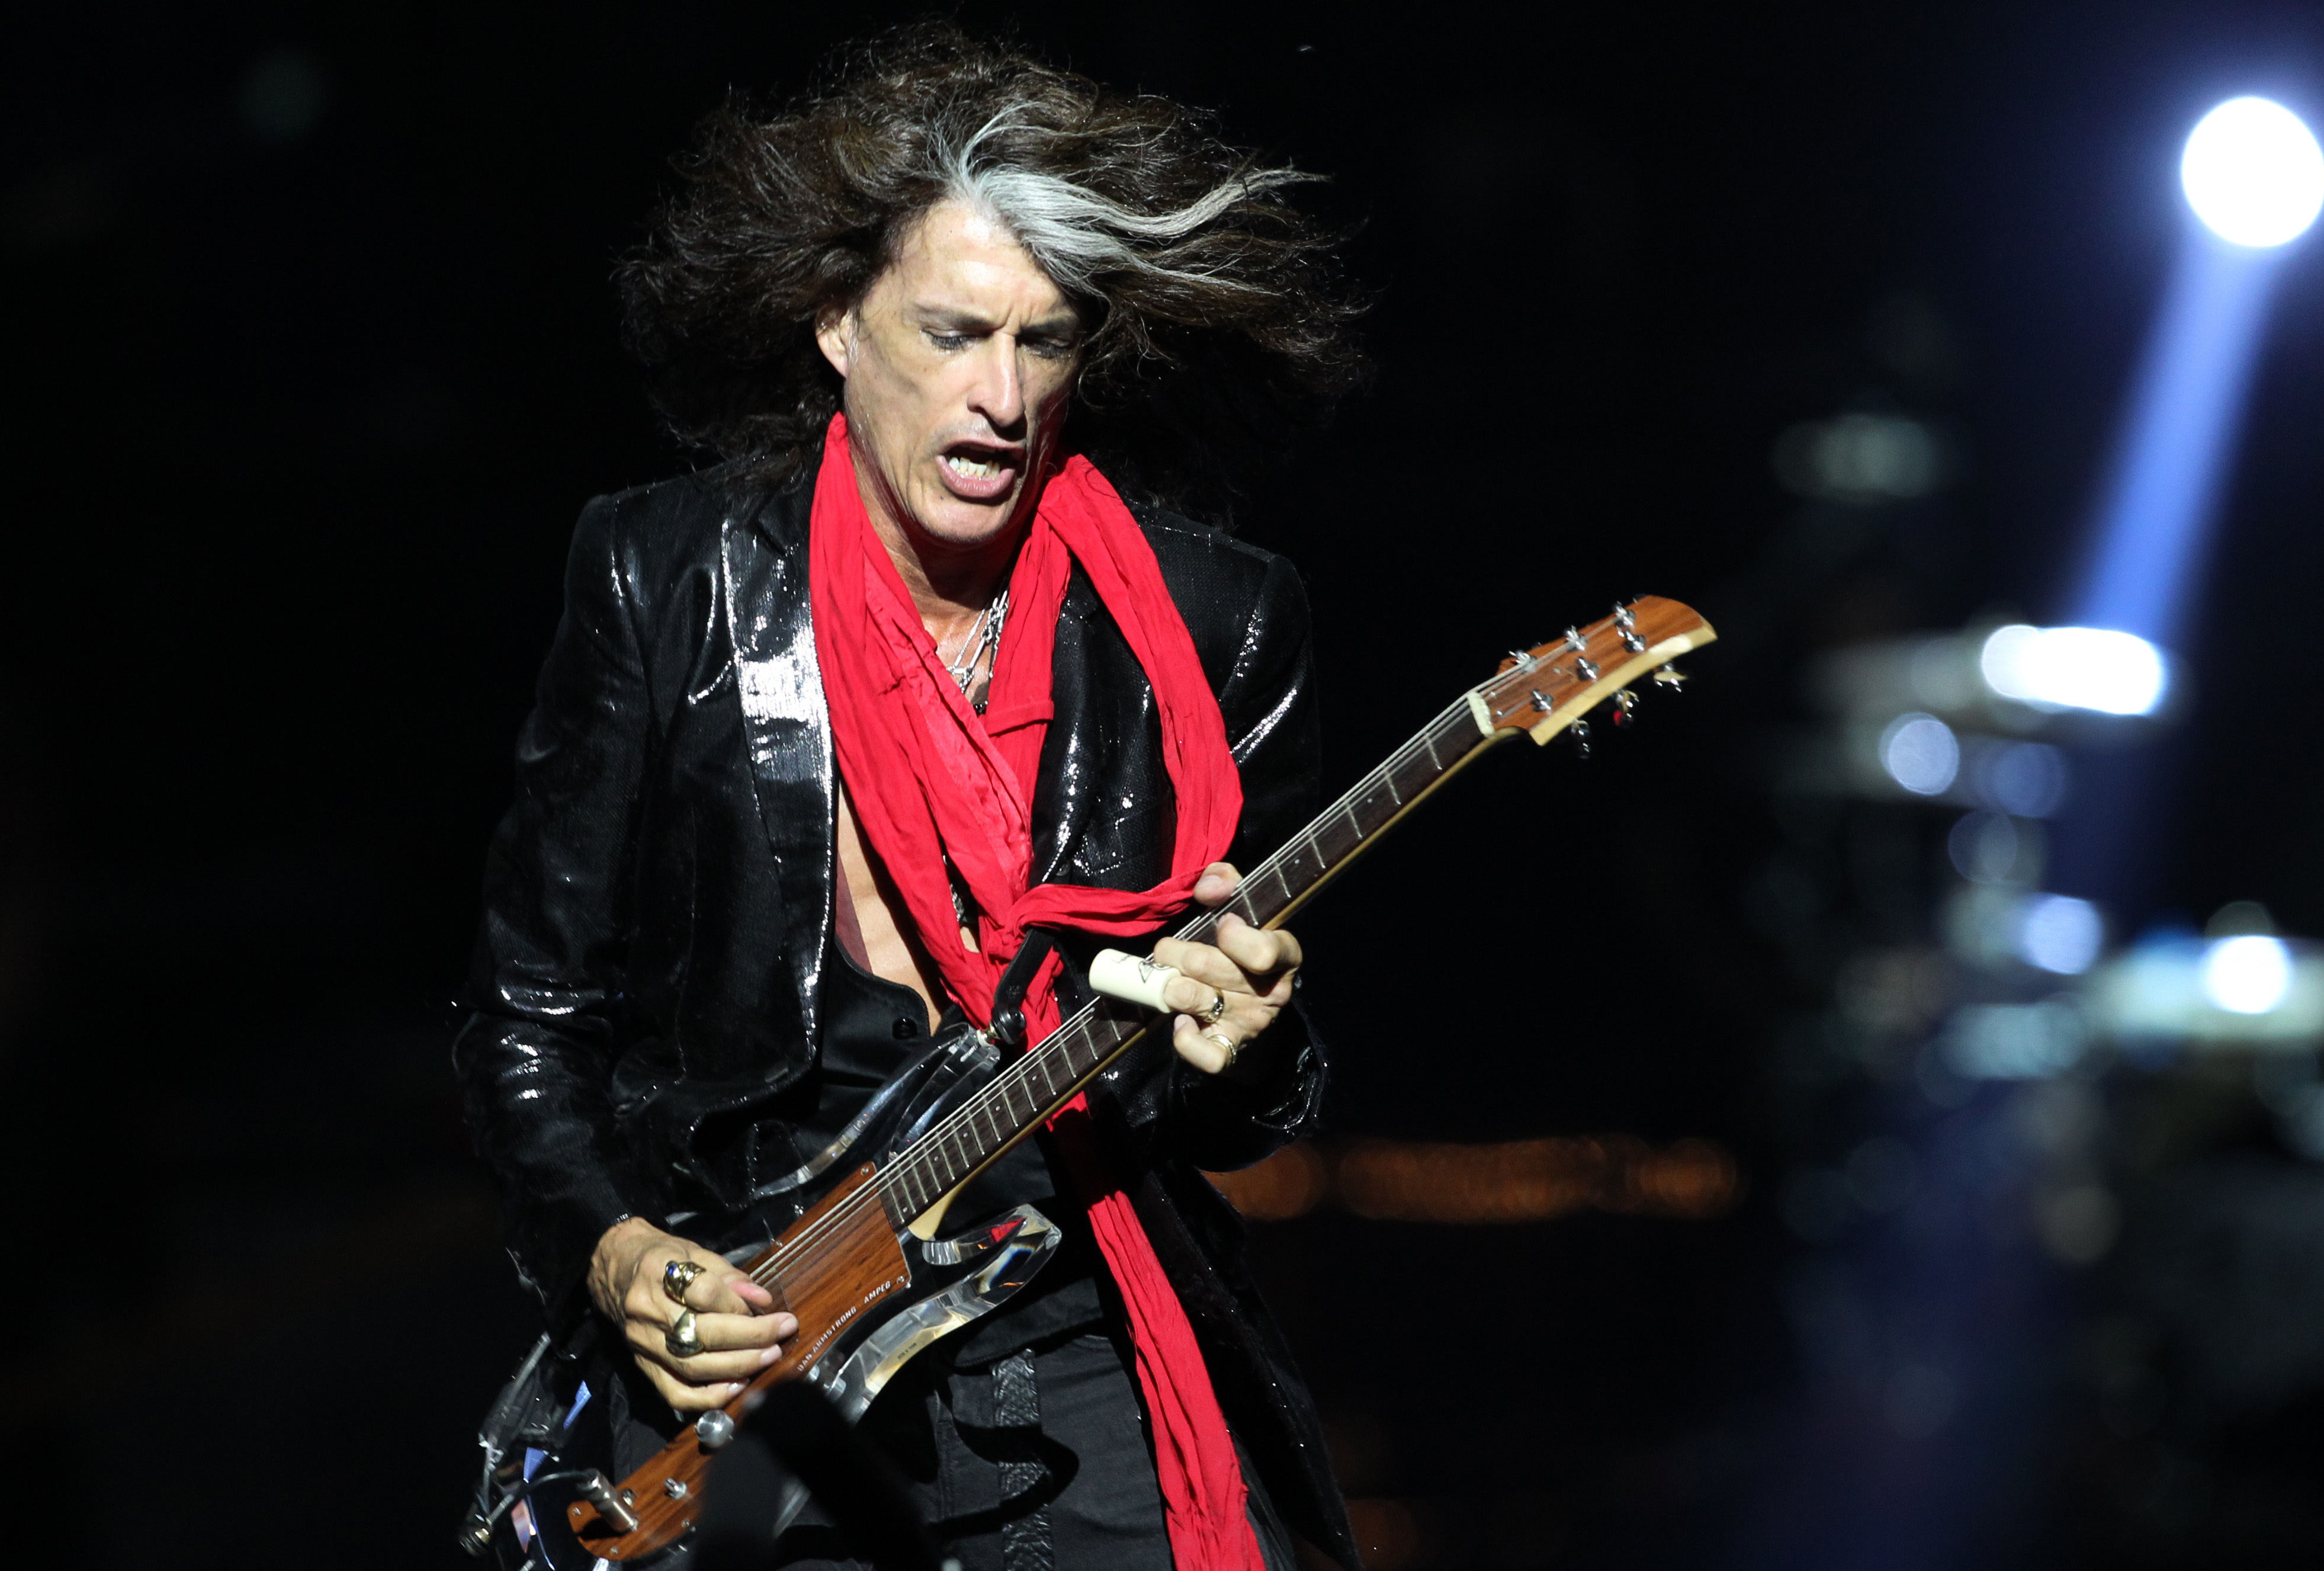 Lead guitarist Joe Perry, of American rock band Aerosmith, performs in Singapore on May 25, 2013. (Wong Maye-E—P)